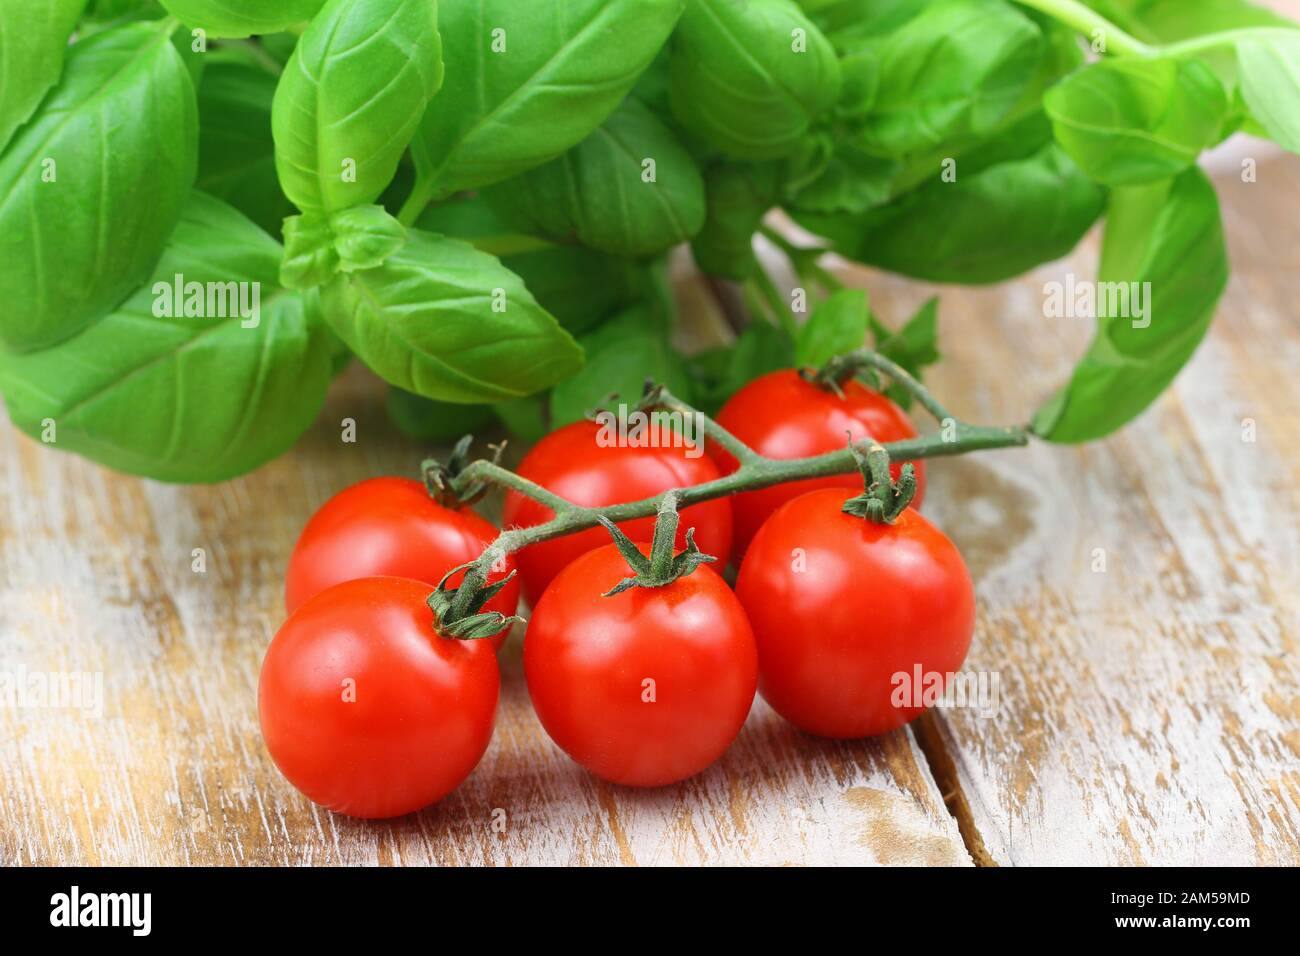 Delicious cherry tomatoes and fresh lettuce on wooden surface Stock Photo